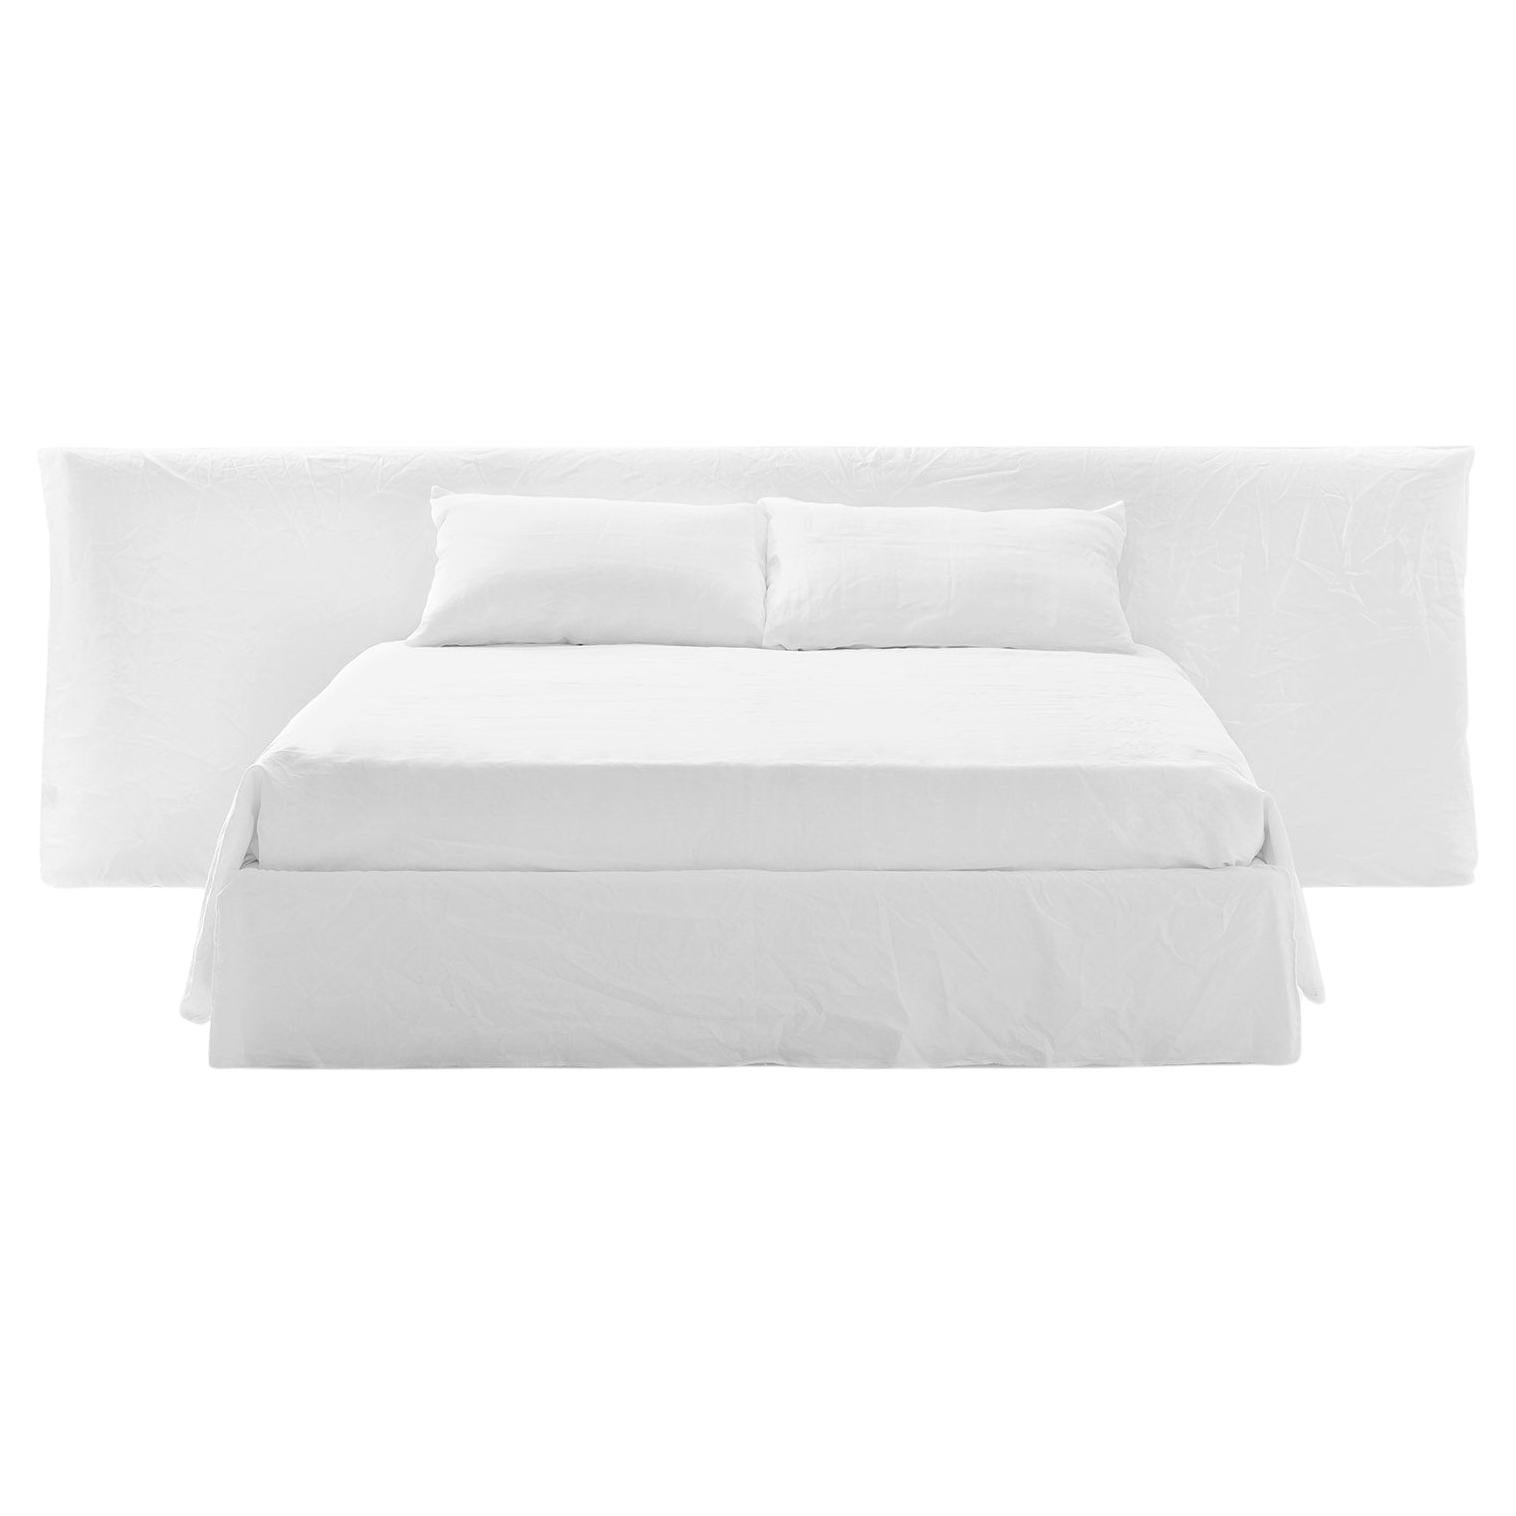 Gervasoni Ghost 81 King Knock Down Bed in White Linen Upholstery by Paola Navone